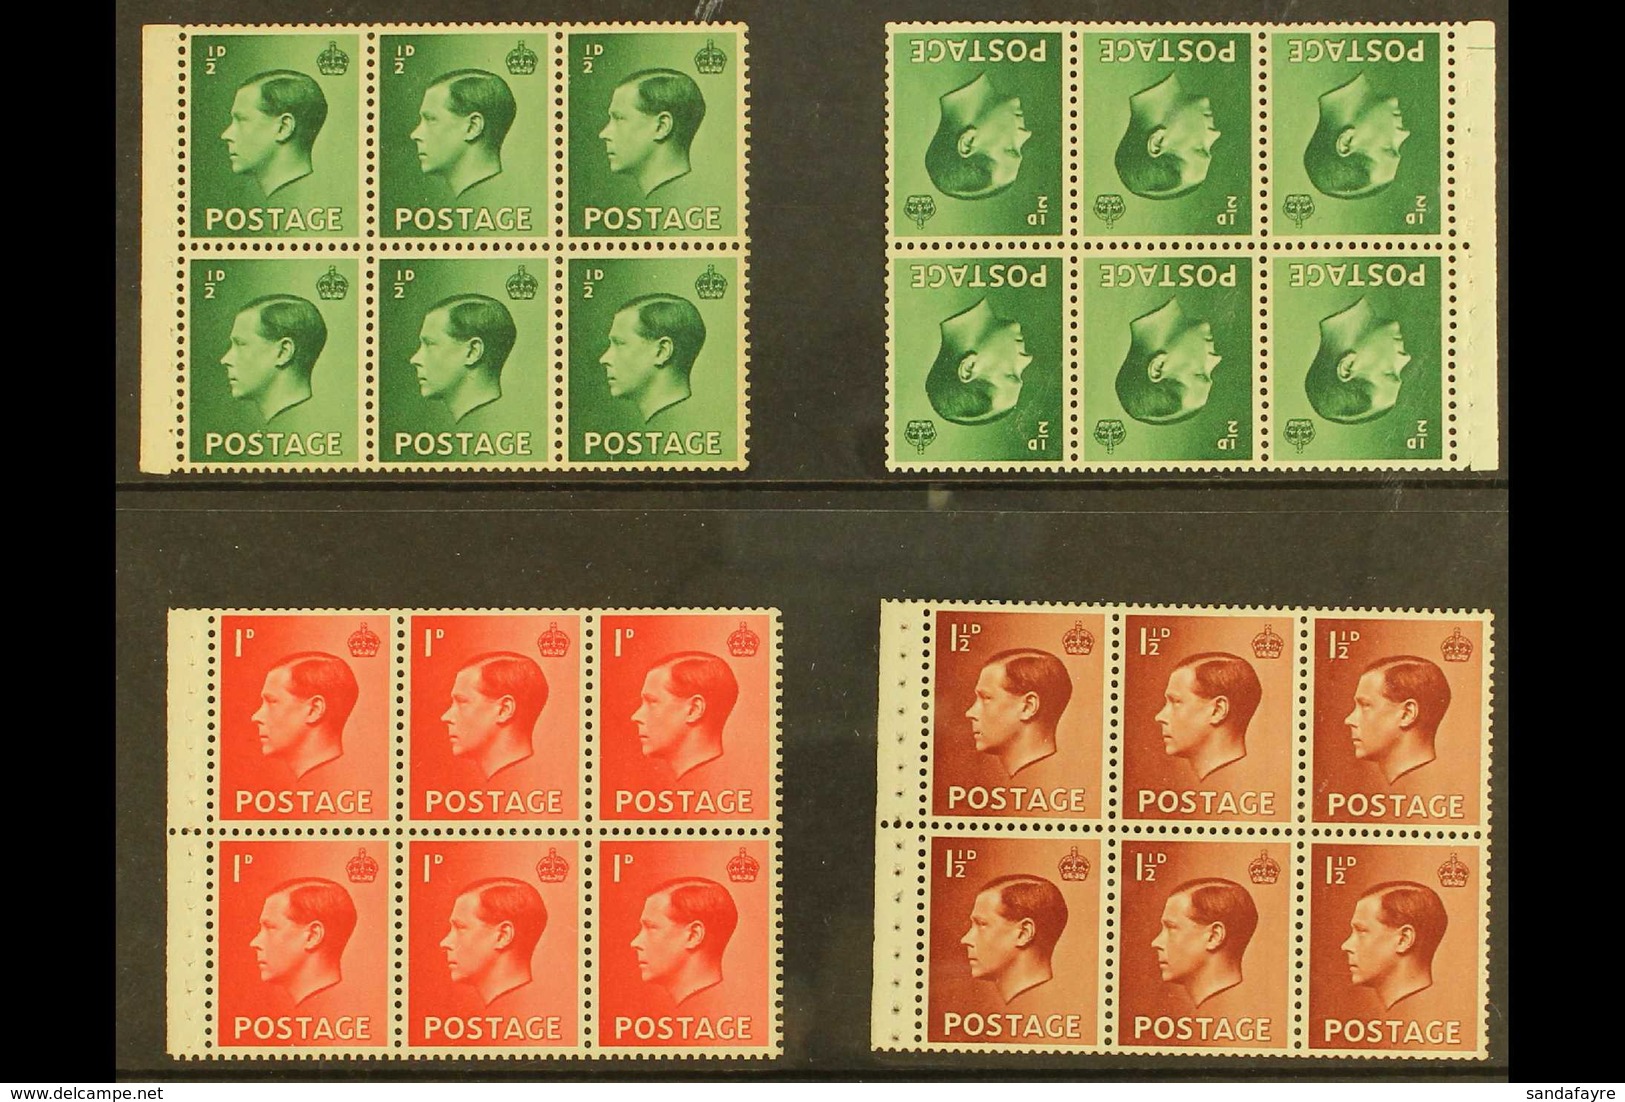 1936 BOOKLET PANES A Never Hinged Mint Selection Of Booklet Panes On A Stock Card That Includes ½d Upright & Inverted Wa - Ohne Zuordnung